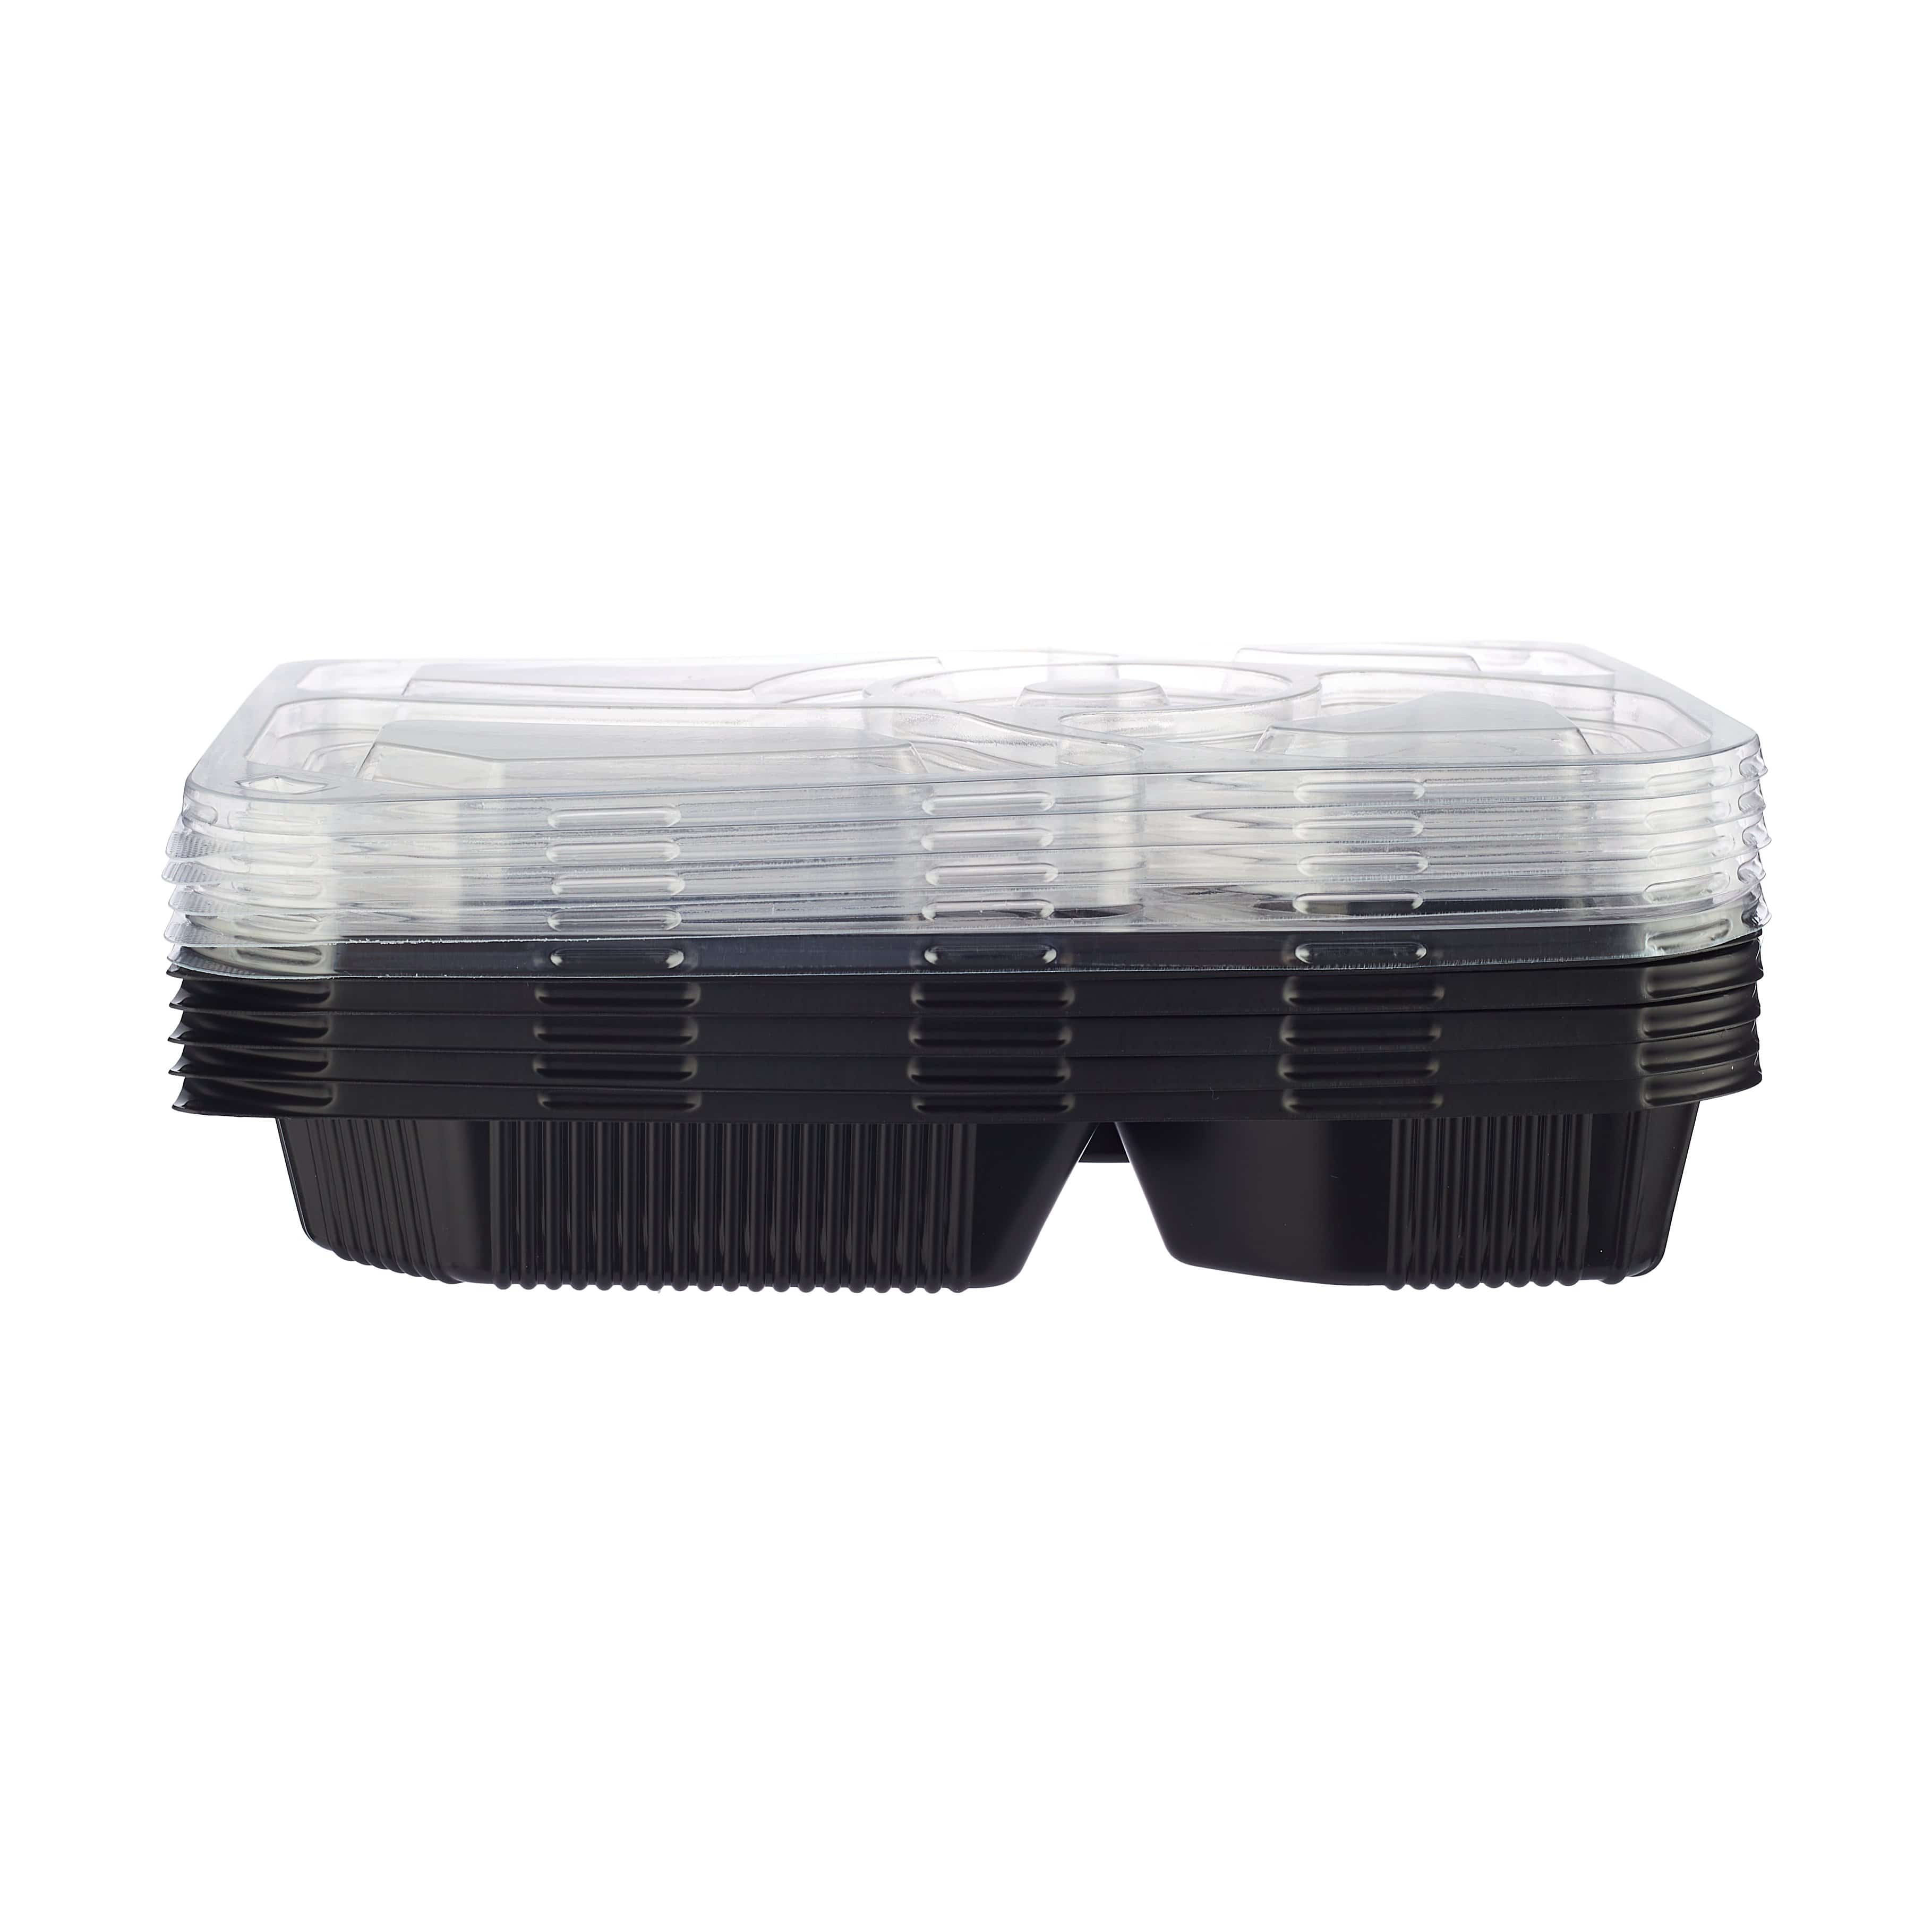 5 Compartment Black Base Rectangular Container With Clear Lid